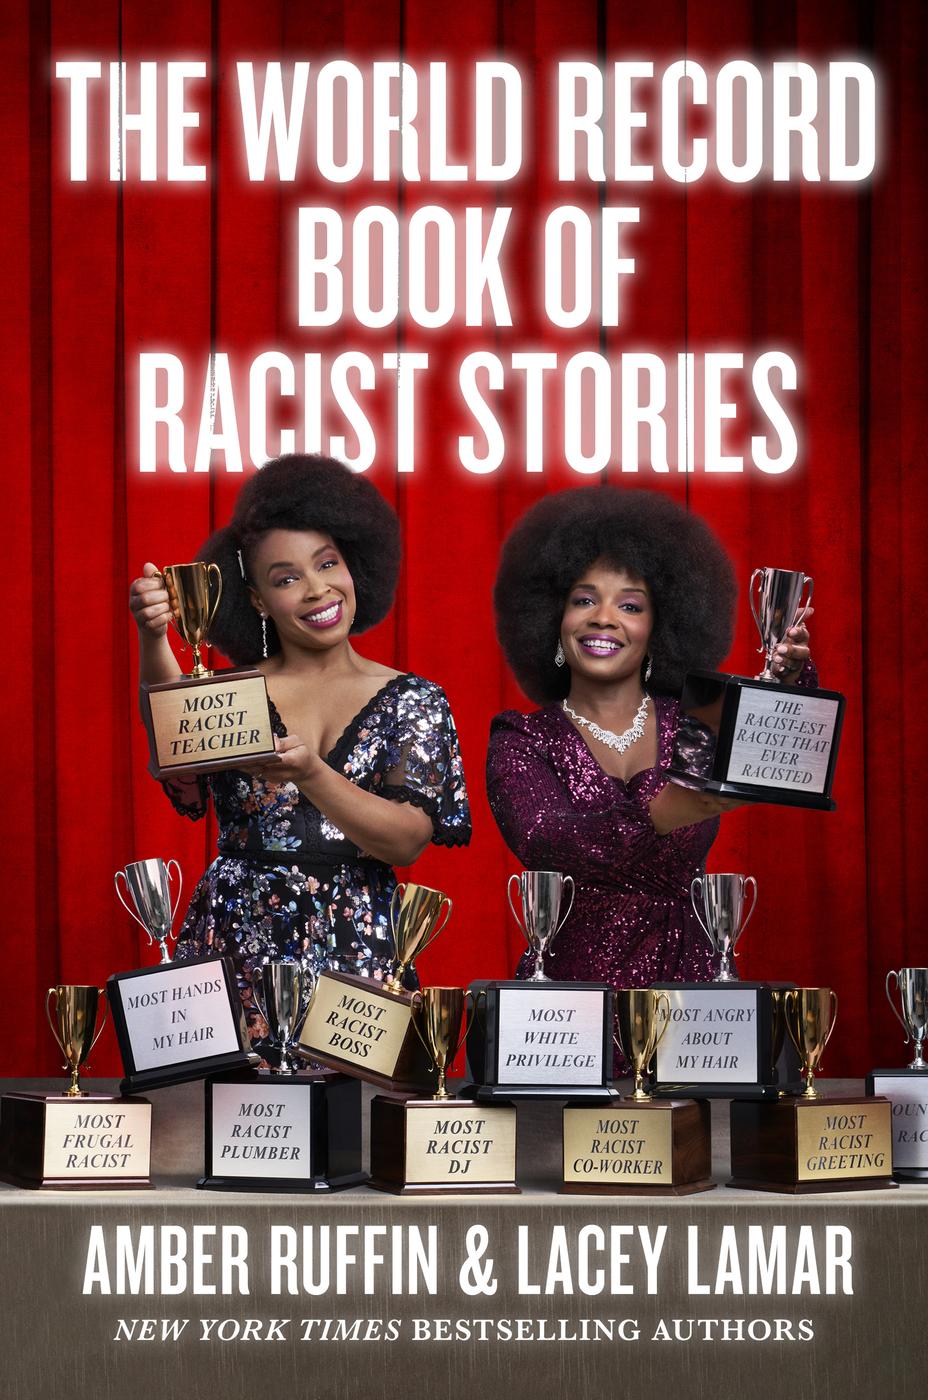 Lacey Lamar, Amber Ruffin: The World Record Book Of Racist Stories (AudiobookFormat, 2022, Hachette Book Group and Blackstone Publishing)